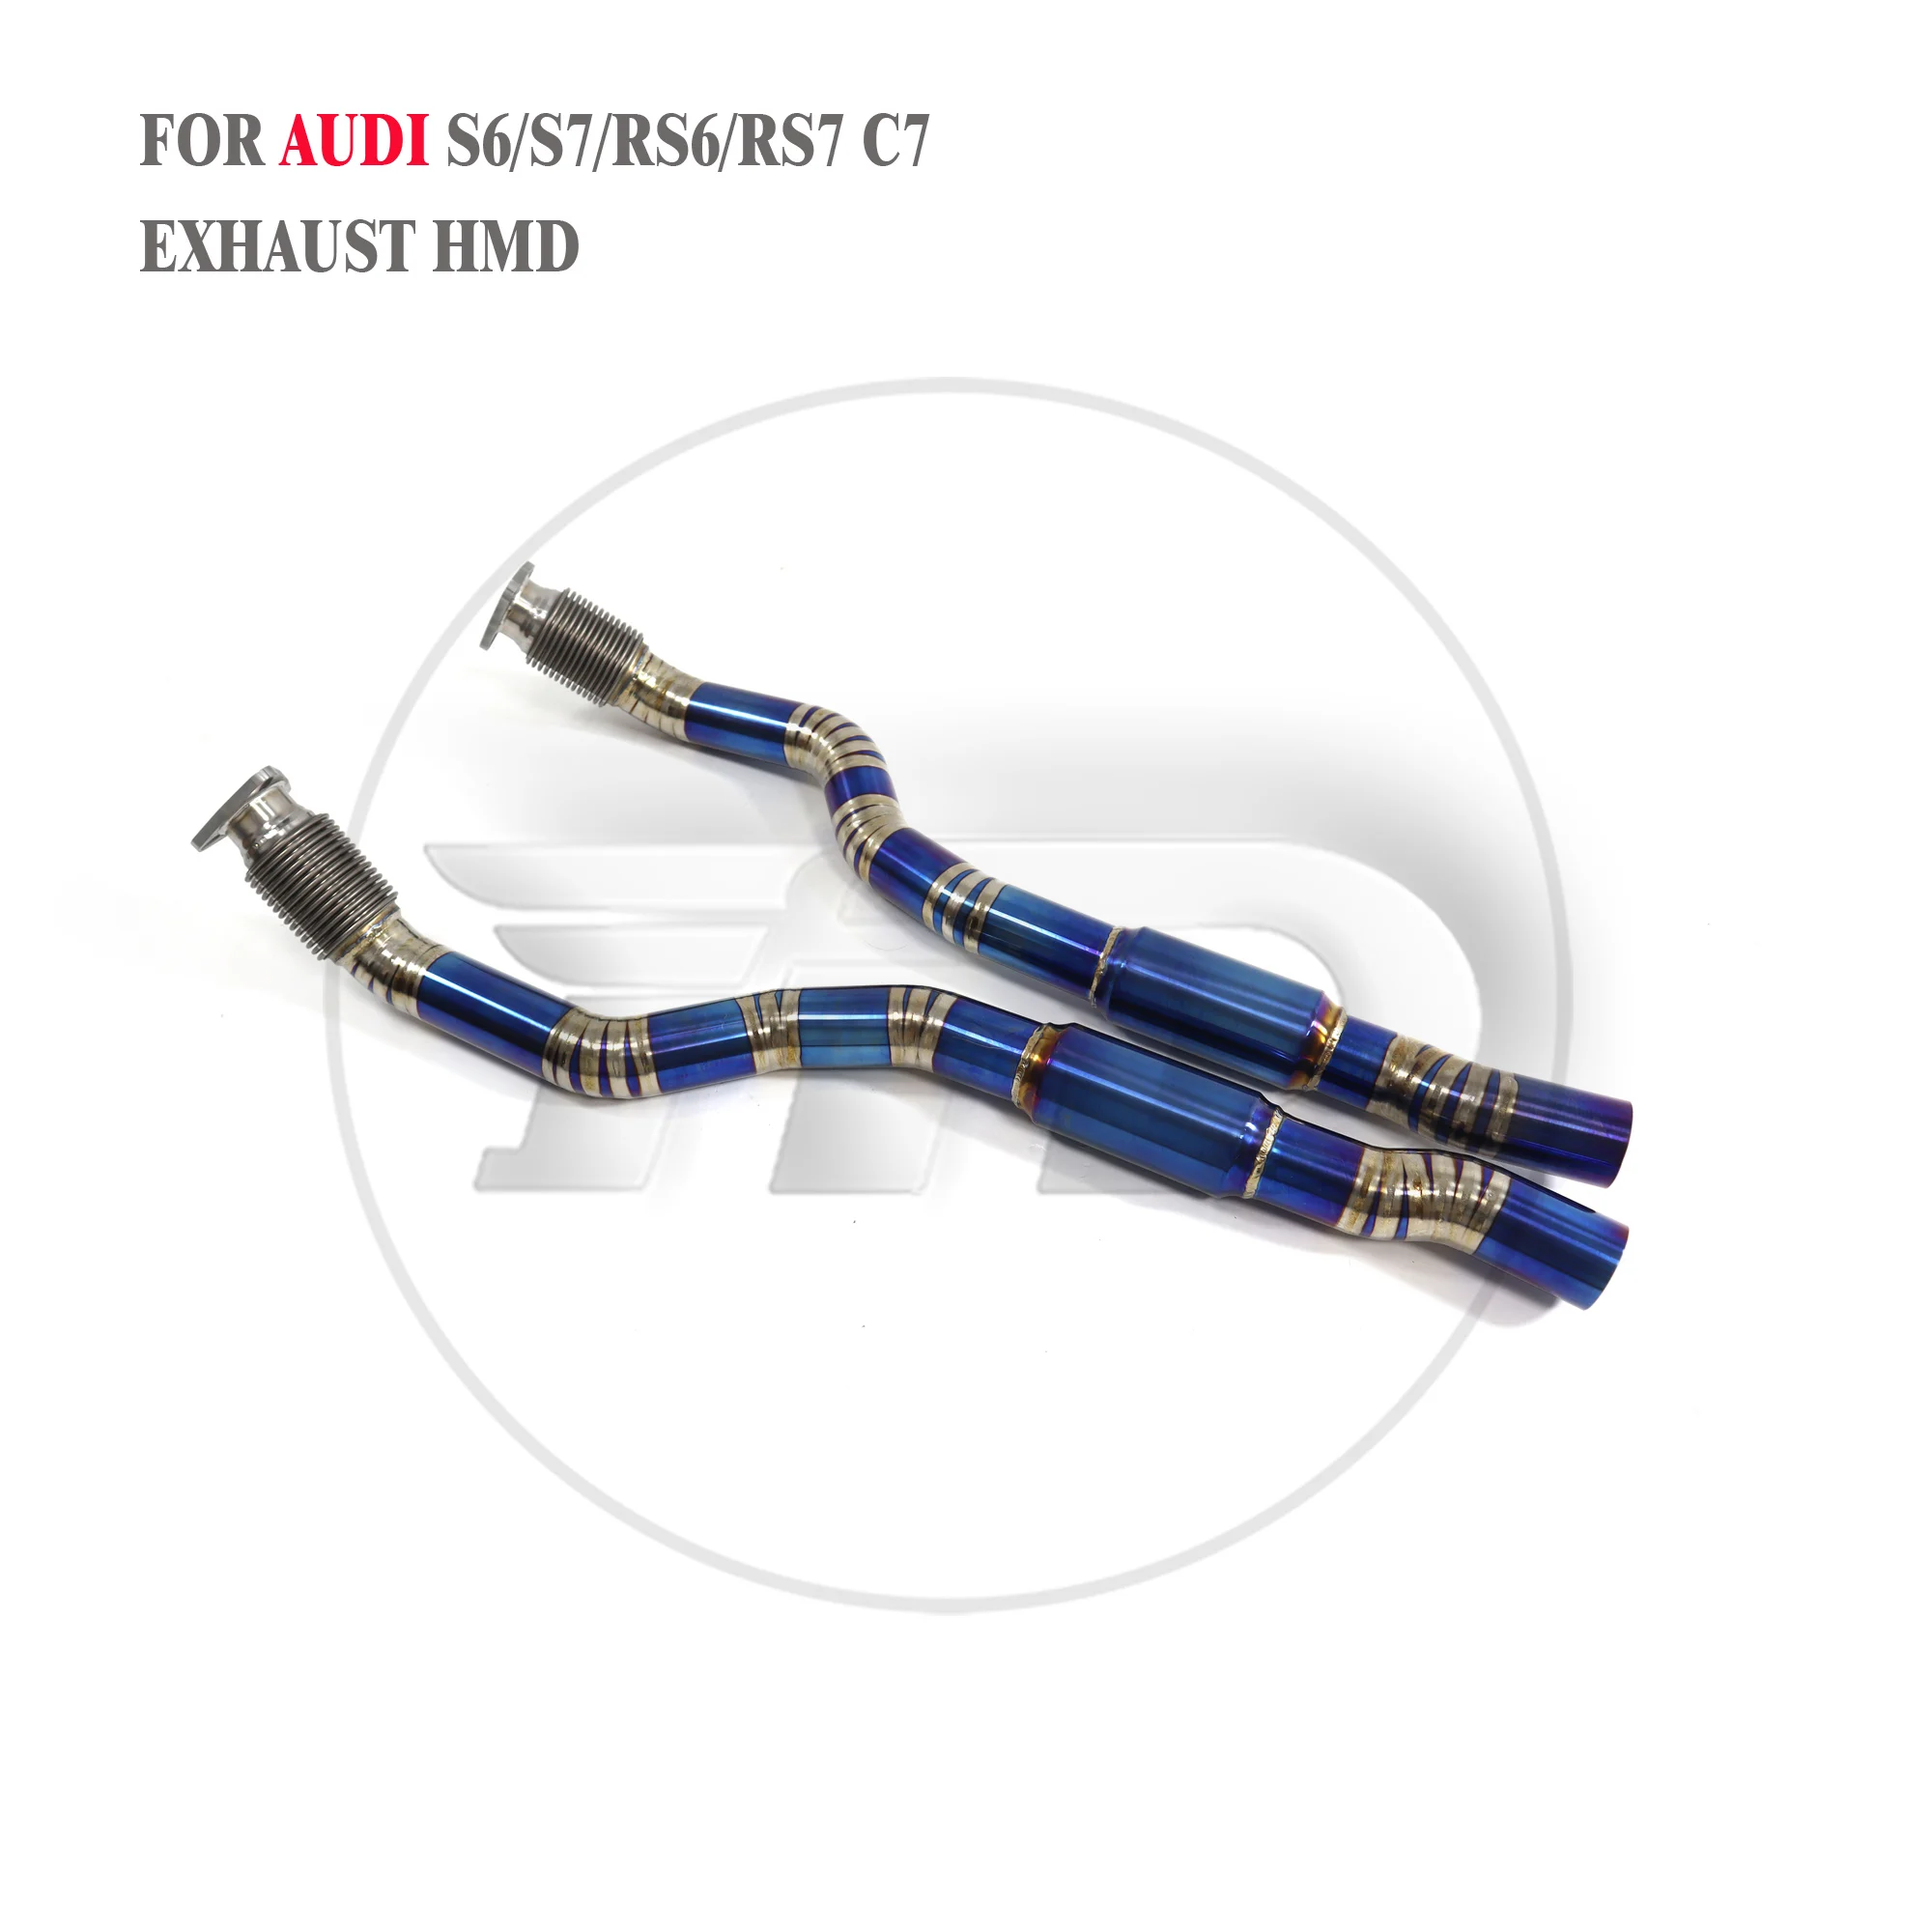 

HMD Titanium Exhaust System Sport Link Pipe for Audi S6 S7 RS6 RS7 C7 4.0T 2013-2018 Front Tube